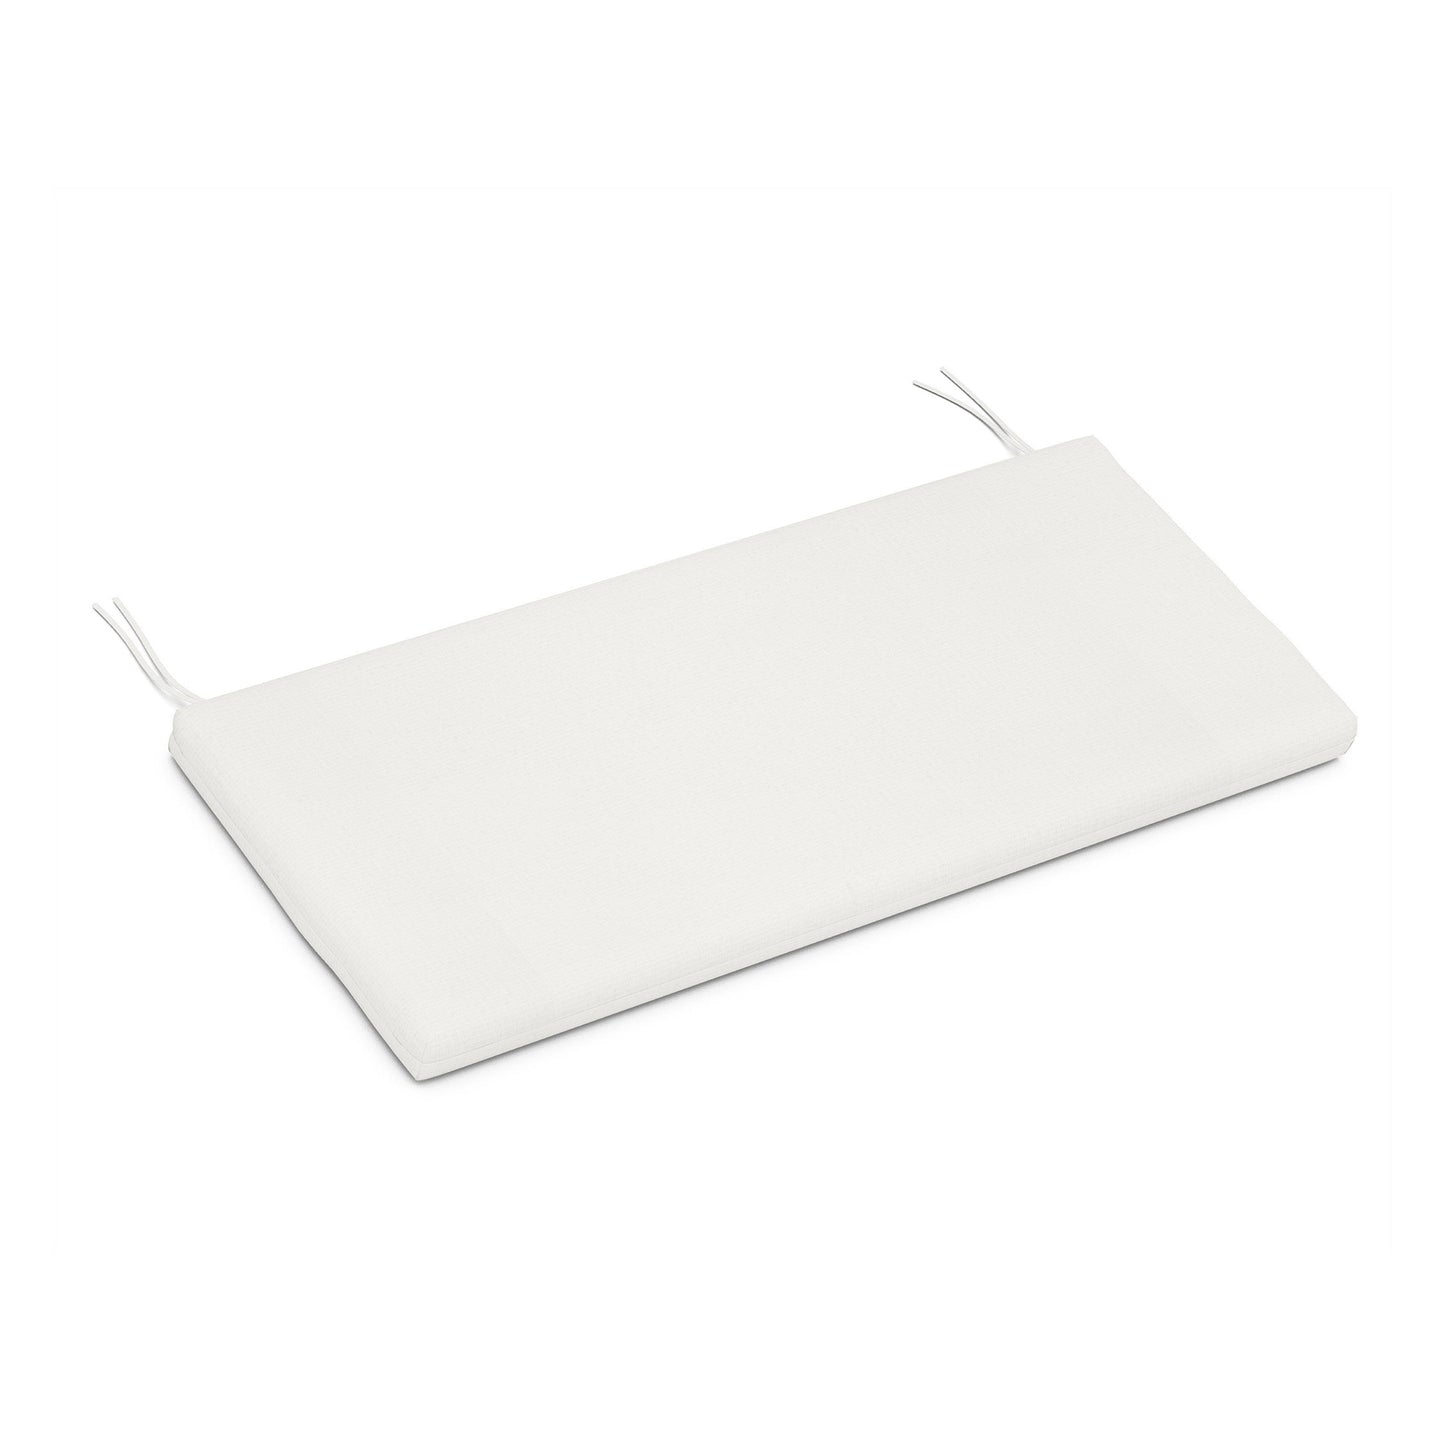 A plain white POLYWOOD® XPWS0060 - Seat Cushion with ties at the corners, displayed on a white background.